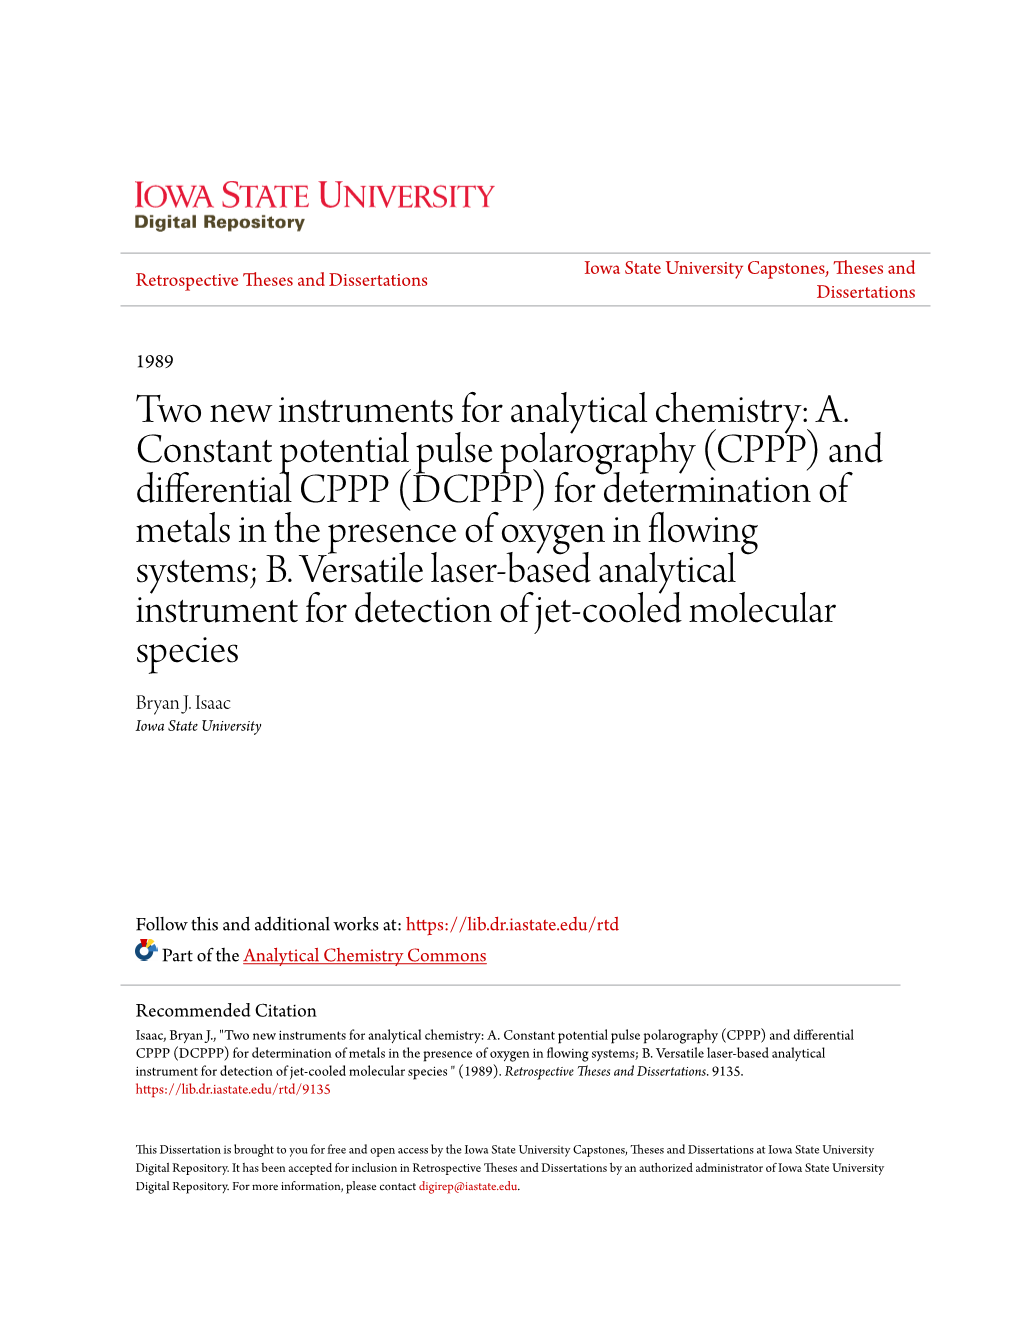 Two New Instruments for Analytical Chemistry: A. Constant Potential Pulse Polarography (CPPP) and Differential CPPP (DCPPP)